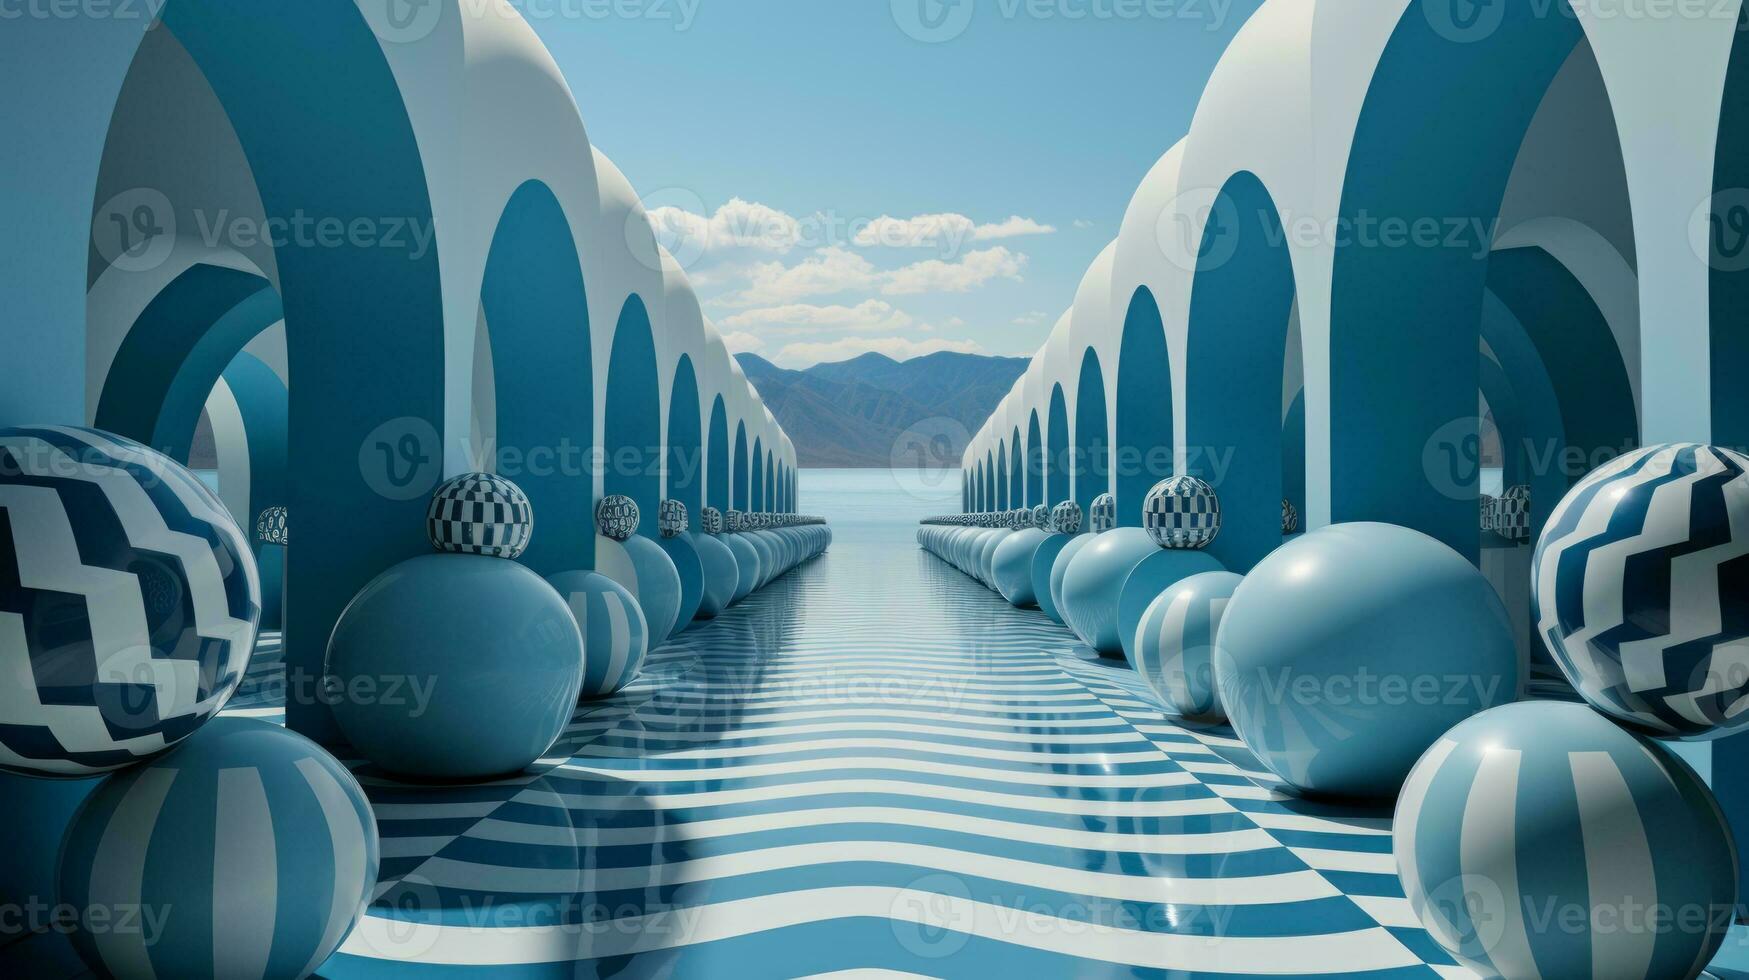 As the sky above glowed with brilliant blue and white spheres, the long corridor seemed to stretch on endlessly, beckoning one to explore its mysterious depths, AI Generative photo